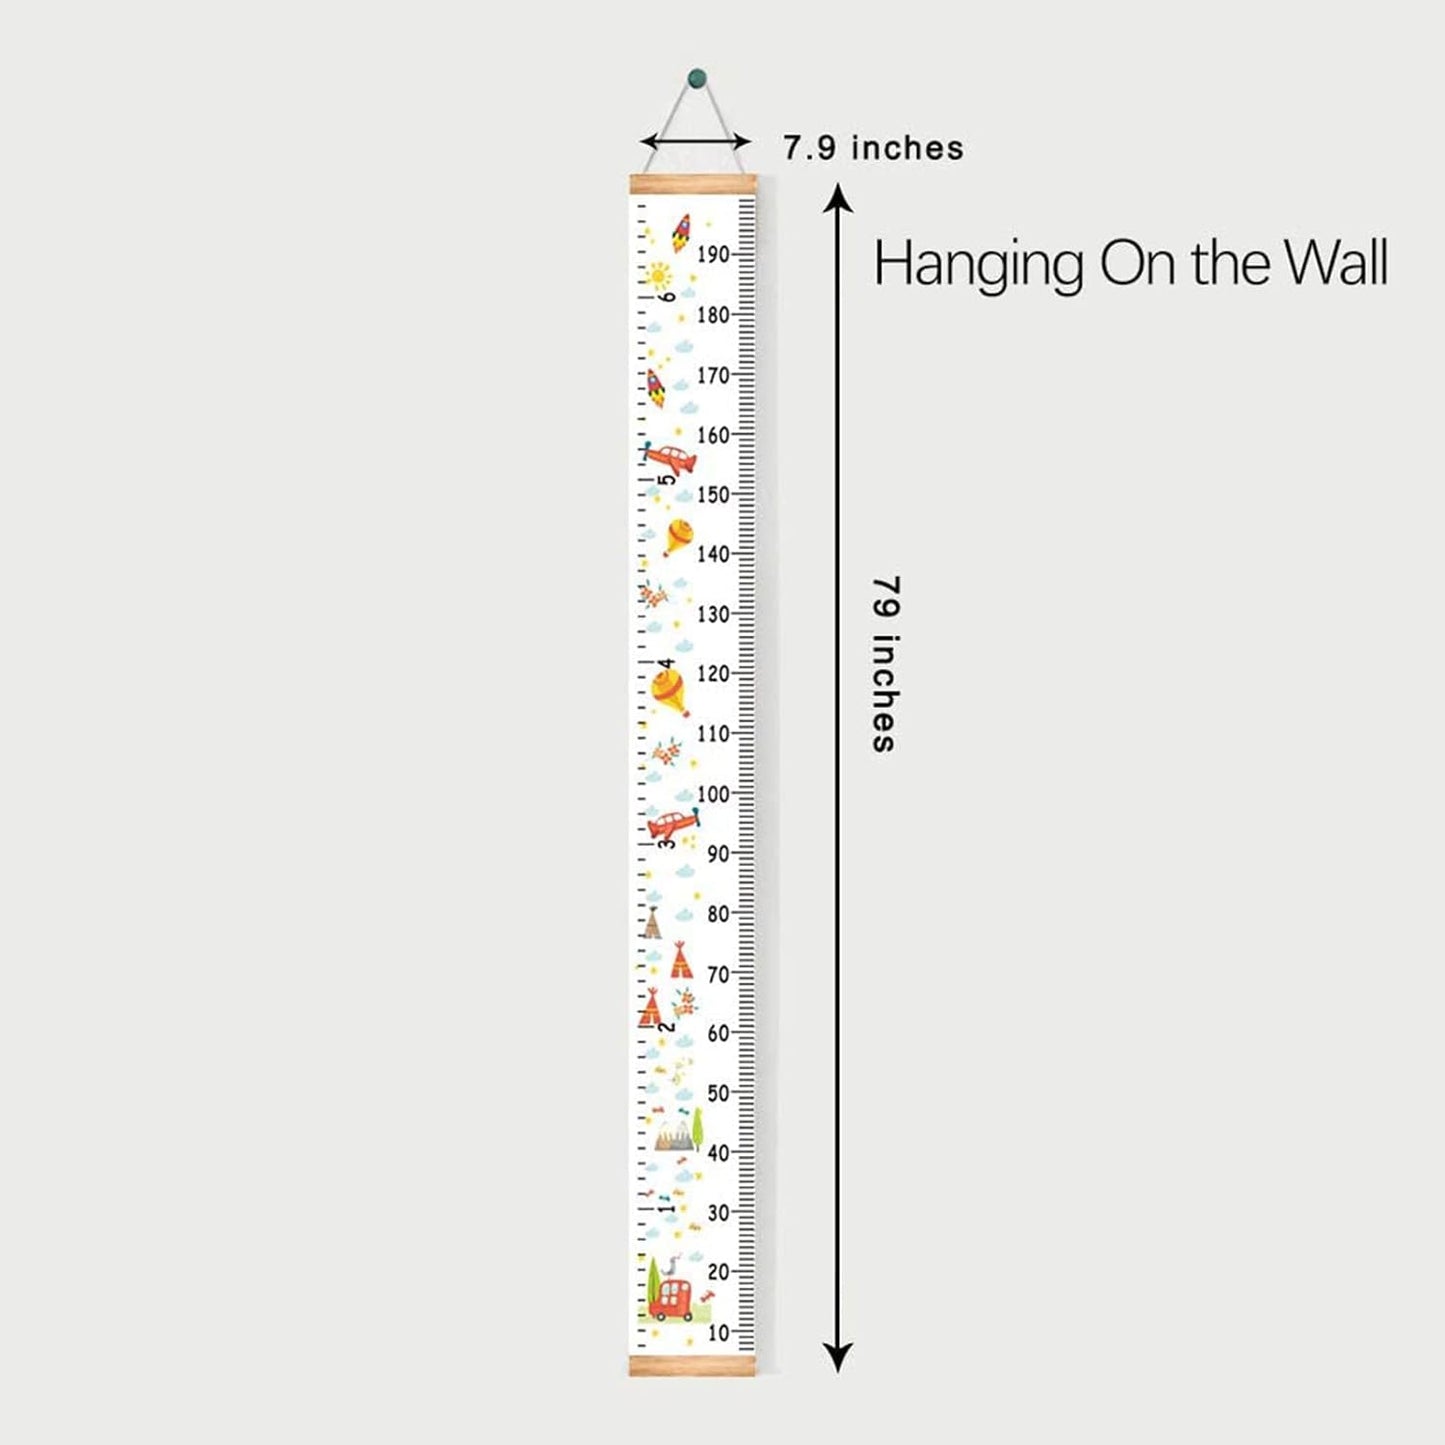 MIBOTE Baby Growth Chart Handing Ruler Wall Decor for Kids, Canvas Removable Growth Height Chart 79" x 7.9"